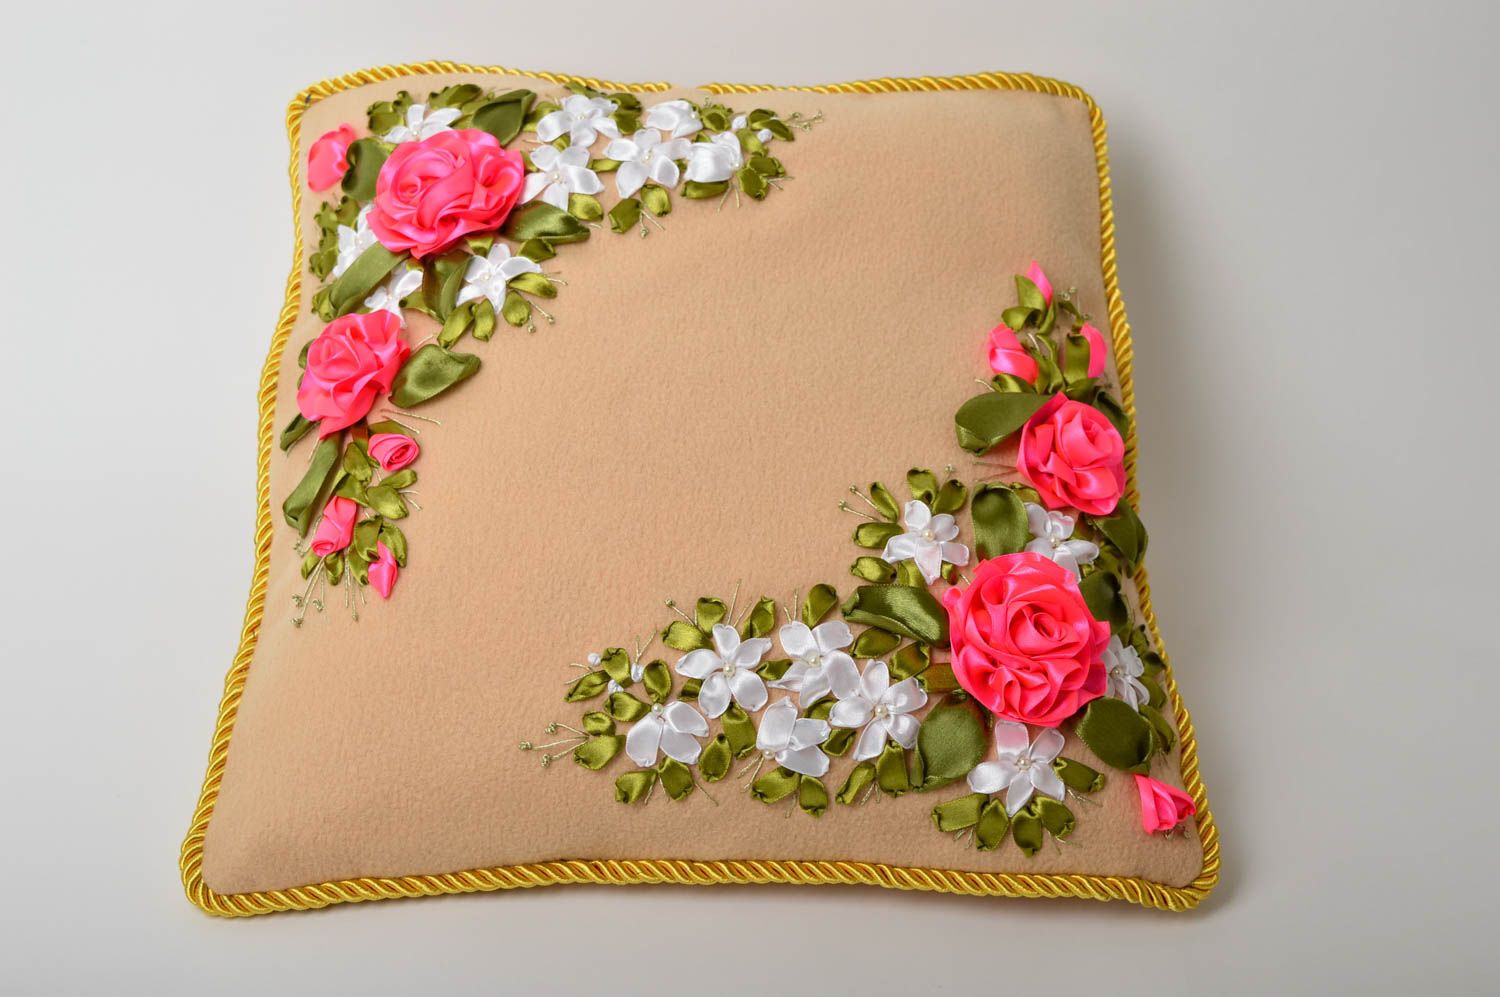 Handmade pillowcase decorative flower pillowcase cool rooms decorative use only photo 2